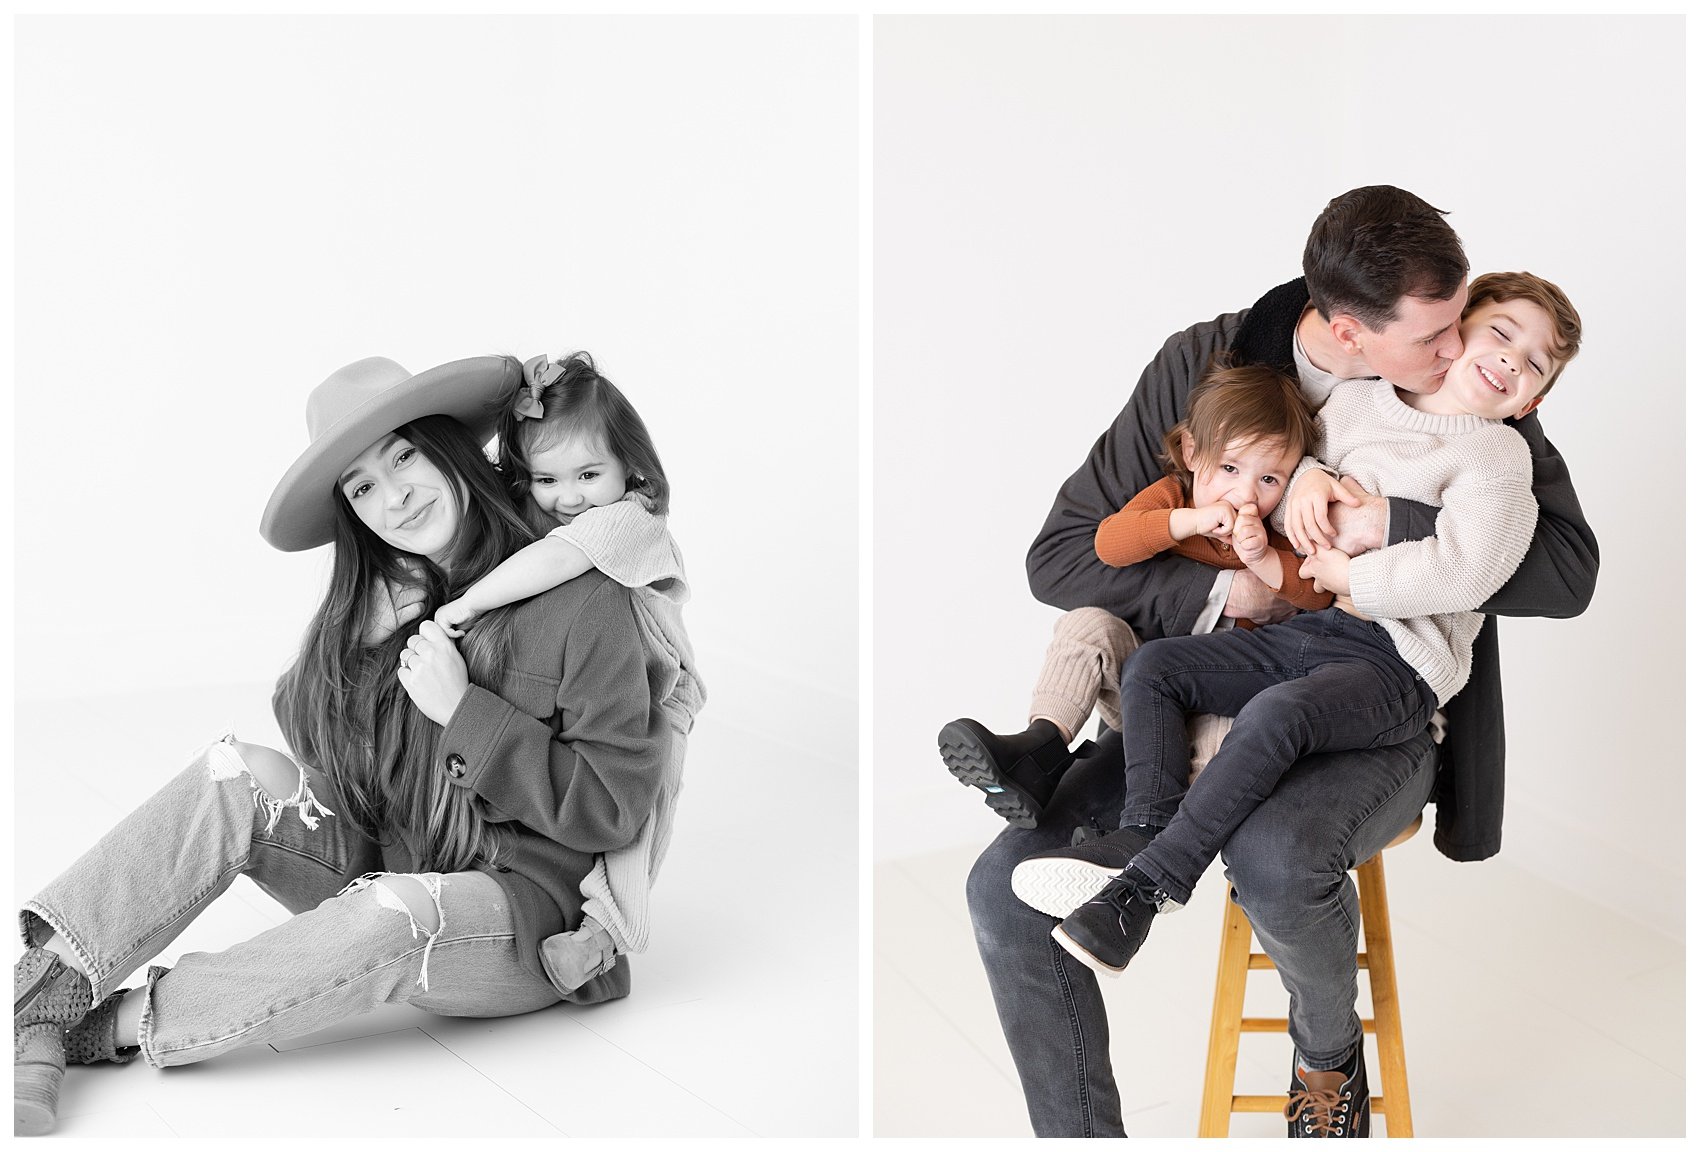 Session in all white studio in Draper, Utah. Family session photographed by Stephanie Lorraine Photography.